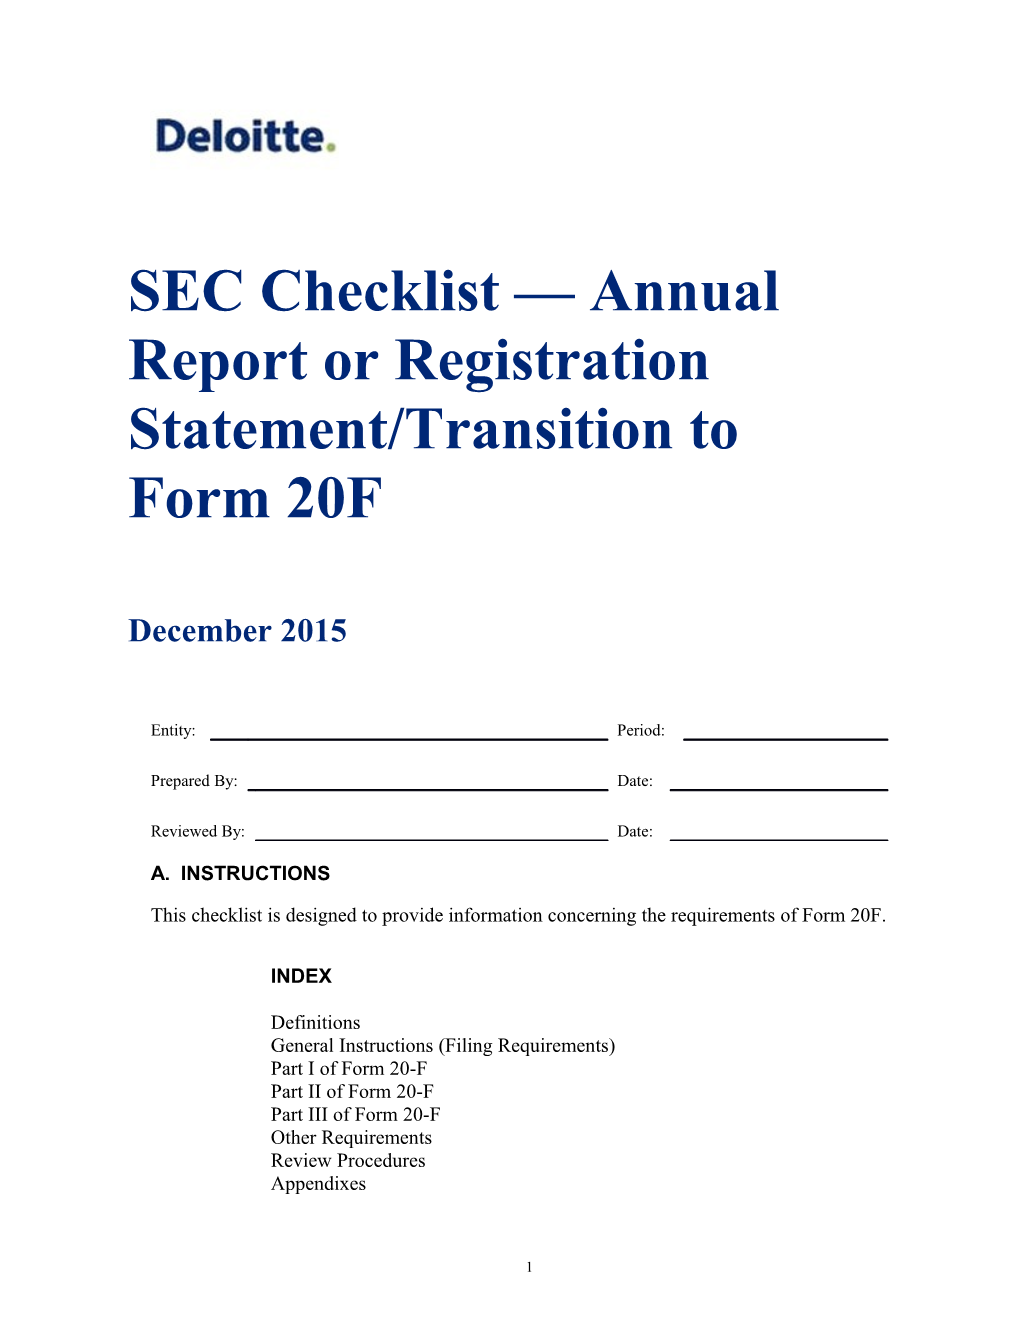 Checklist for Annual Report on SEC Form 20-F(4-11)